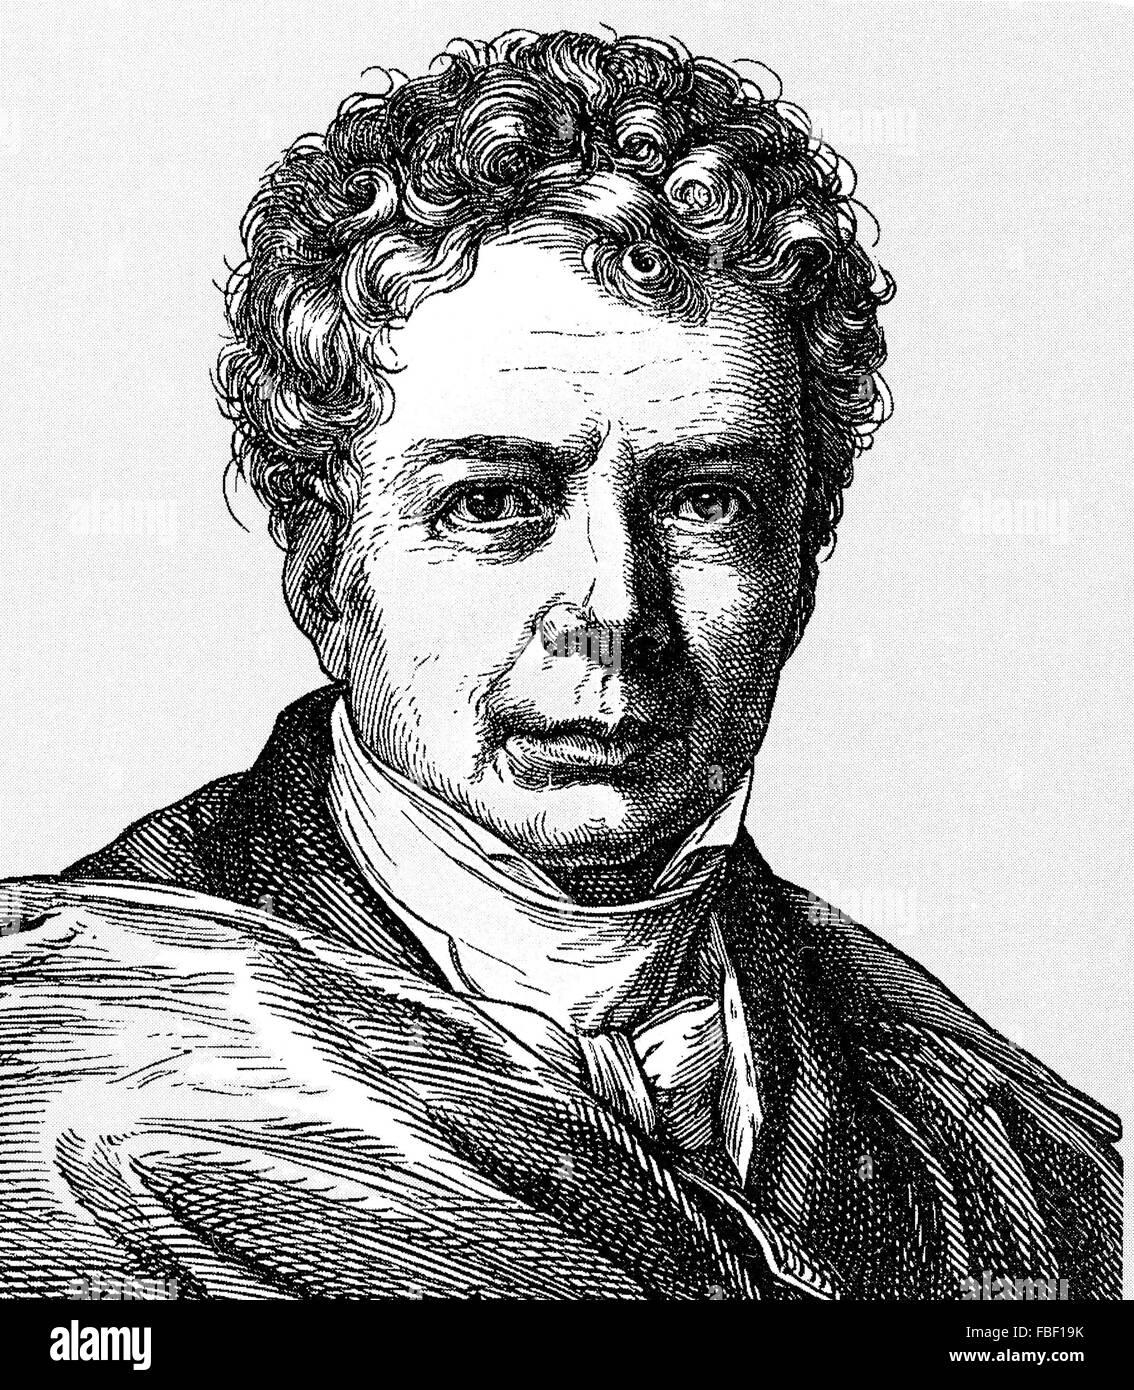 FRIEDRICH WILHELM SCHELLING (1775-1854) German philosopher in an engraving based on an 1835 painting Stock Photo